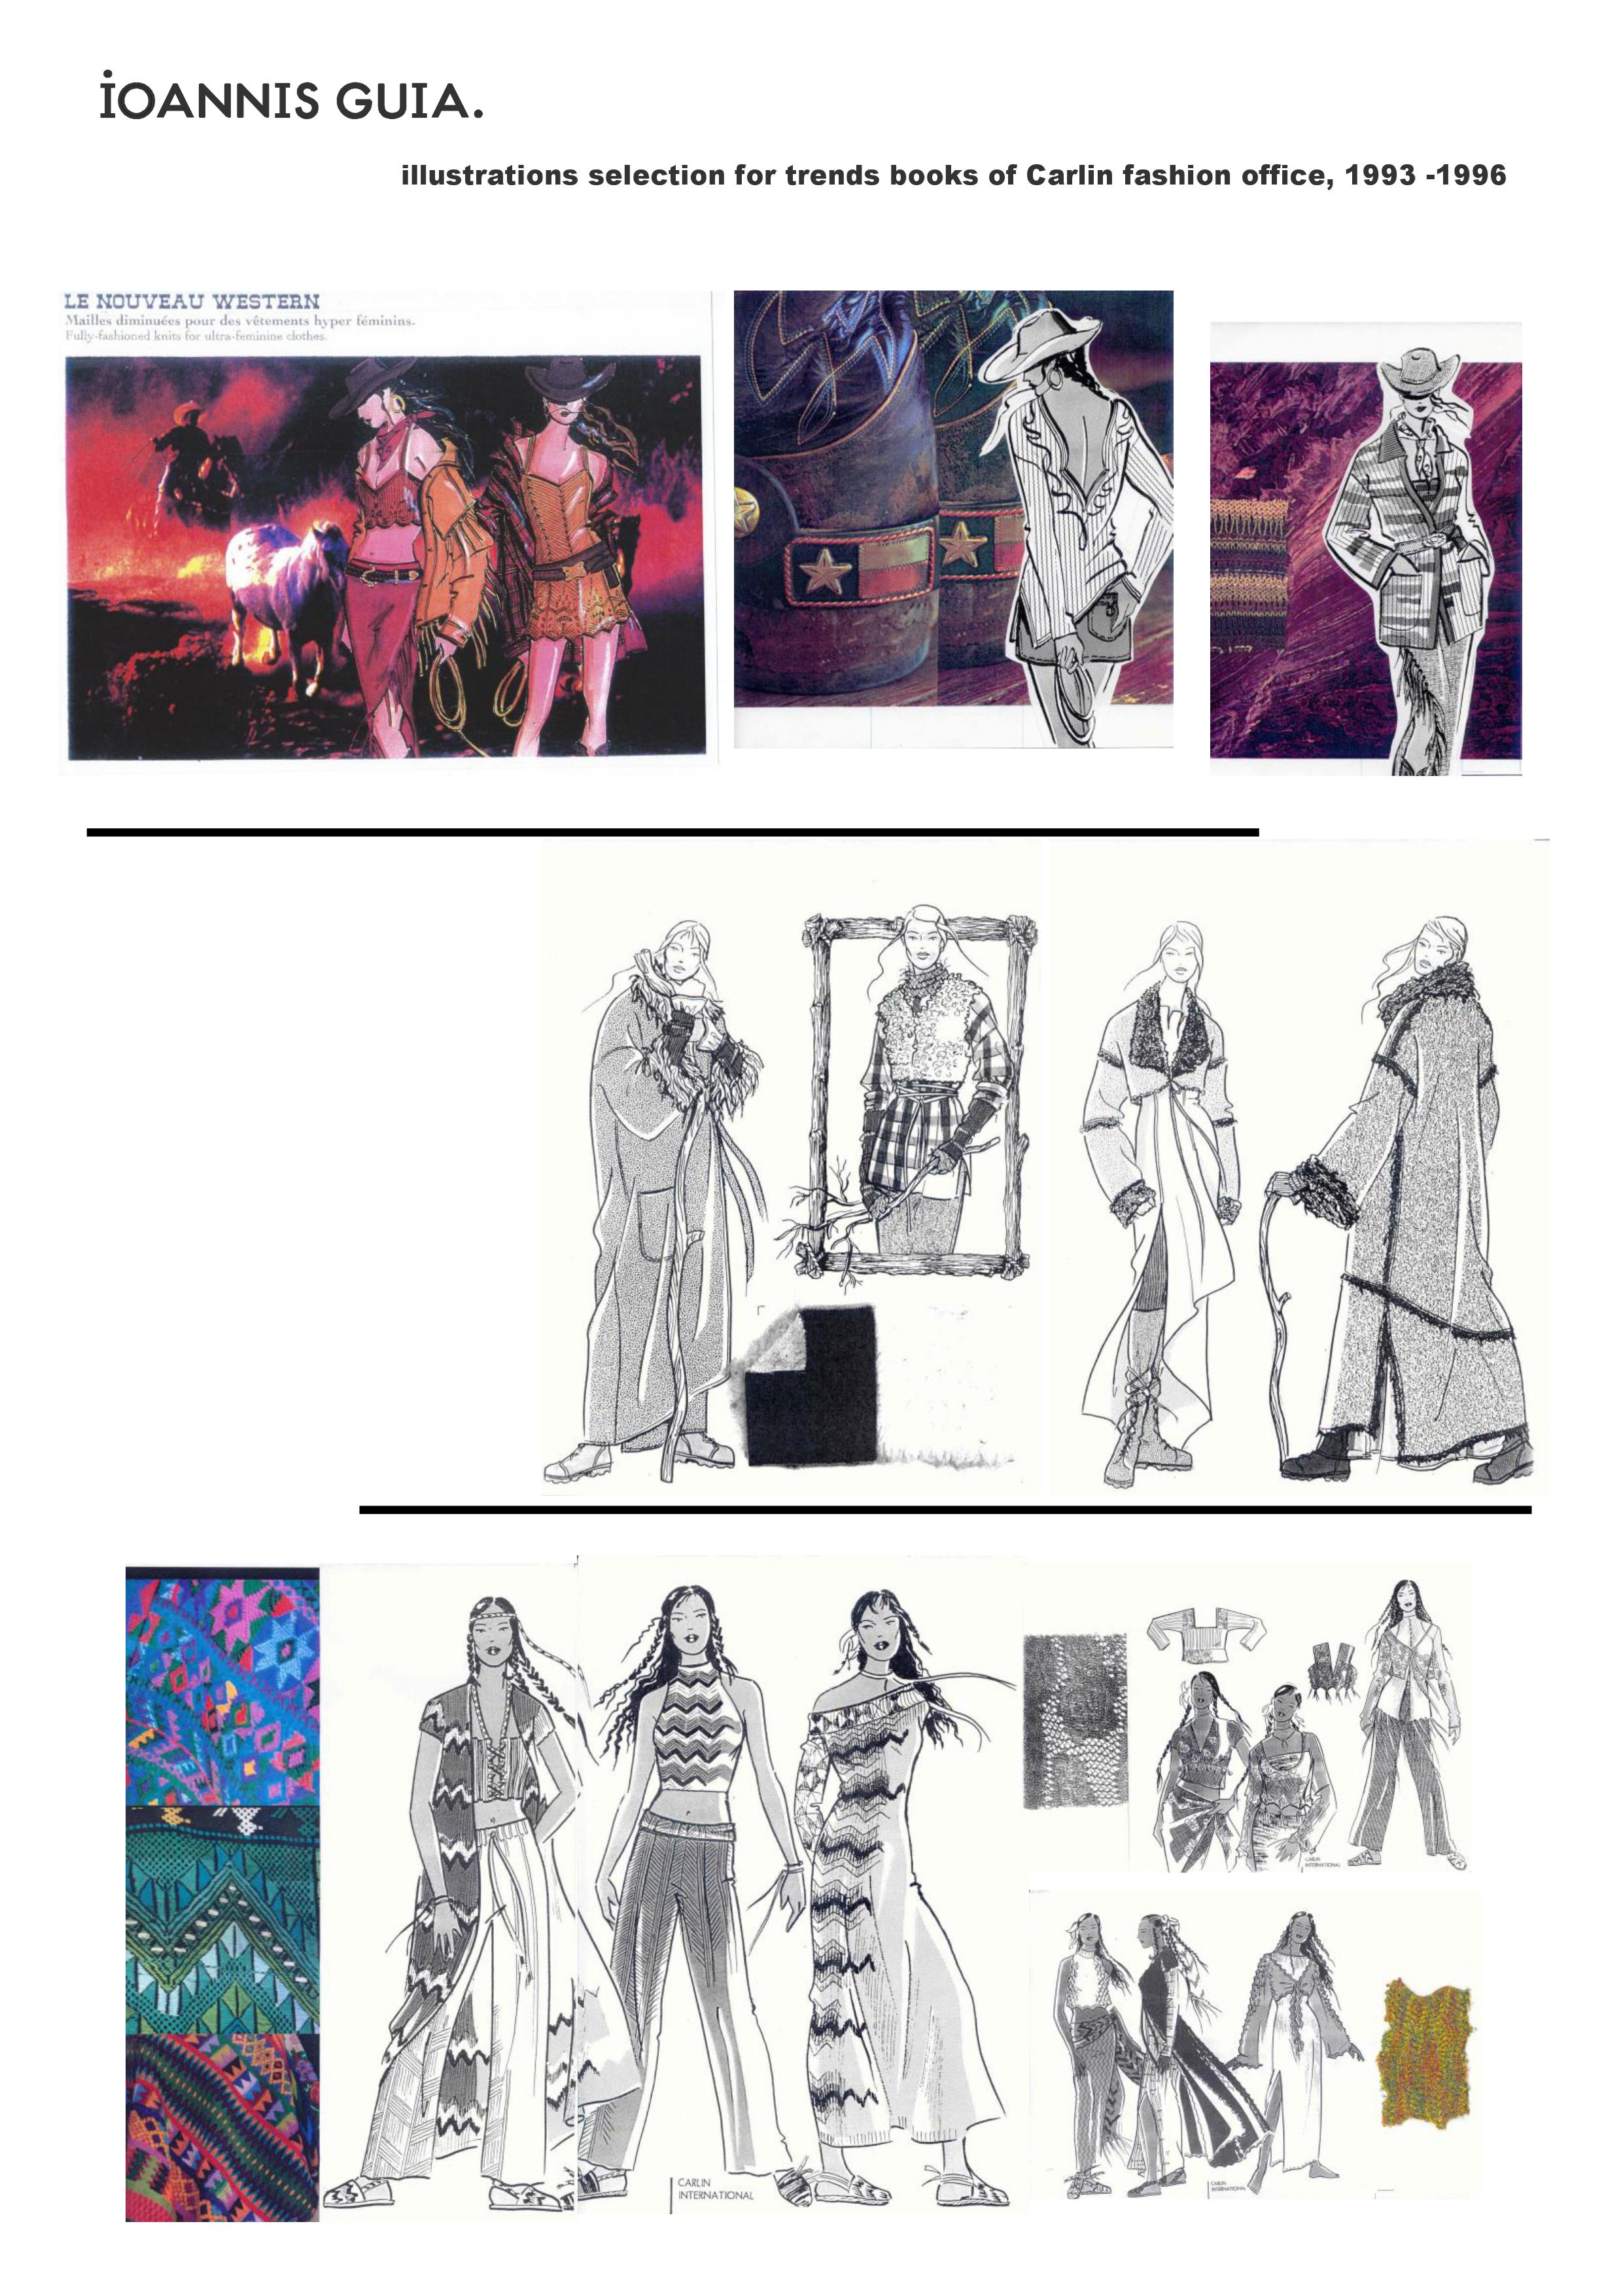 Illustrations for trends books of Carlin fashion office